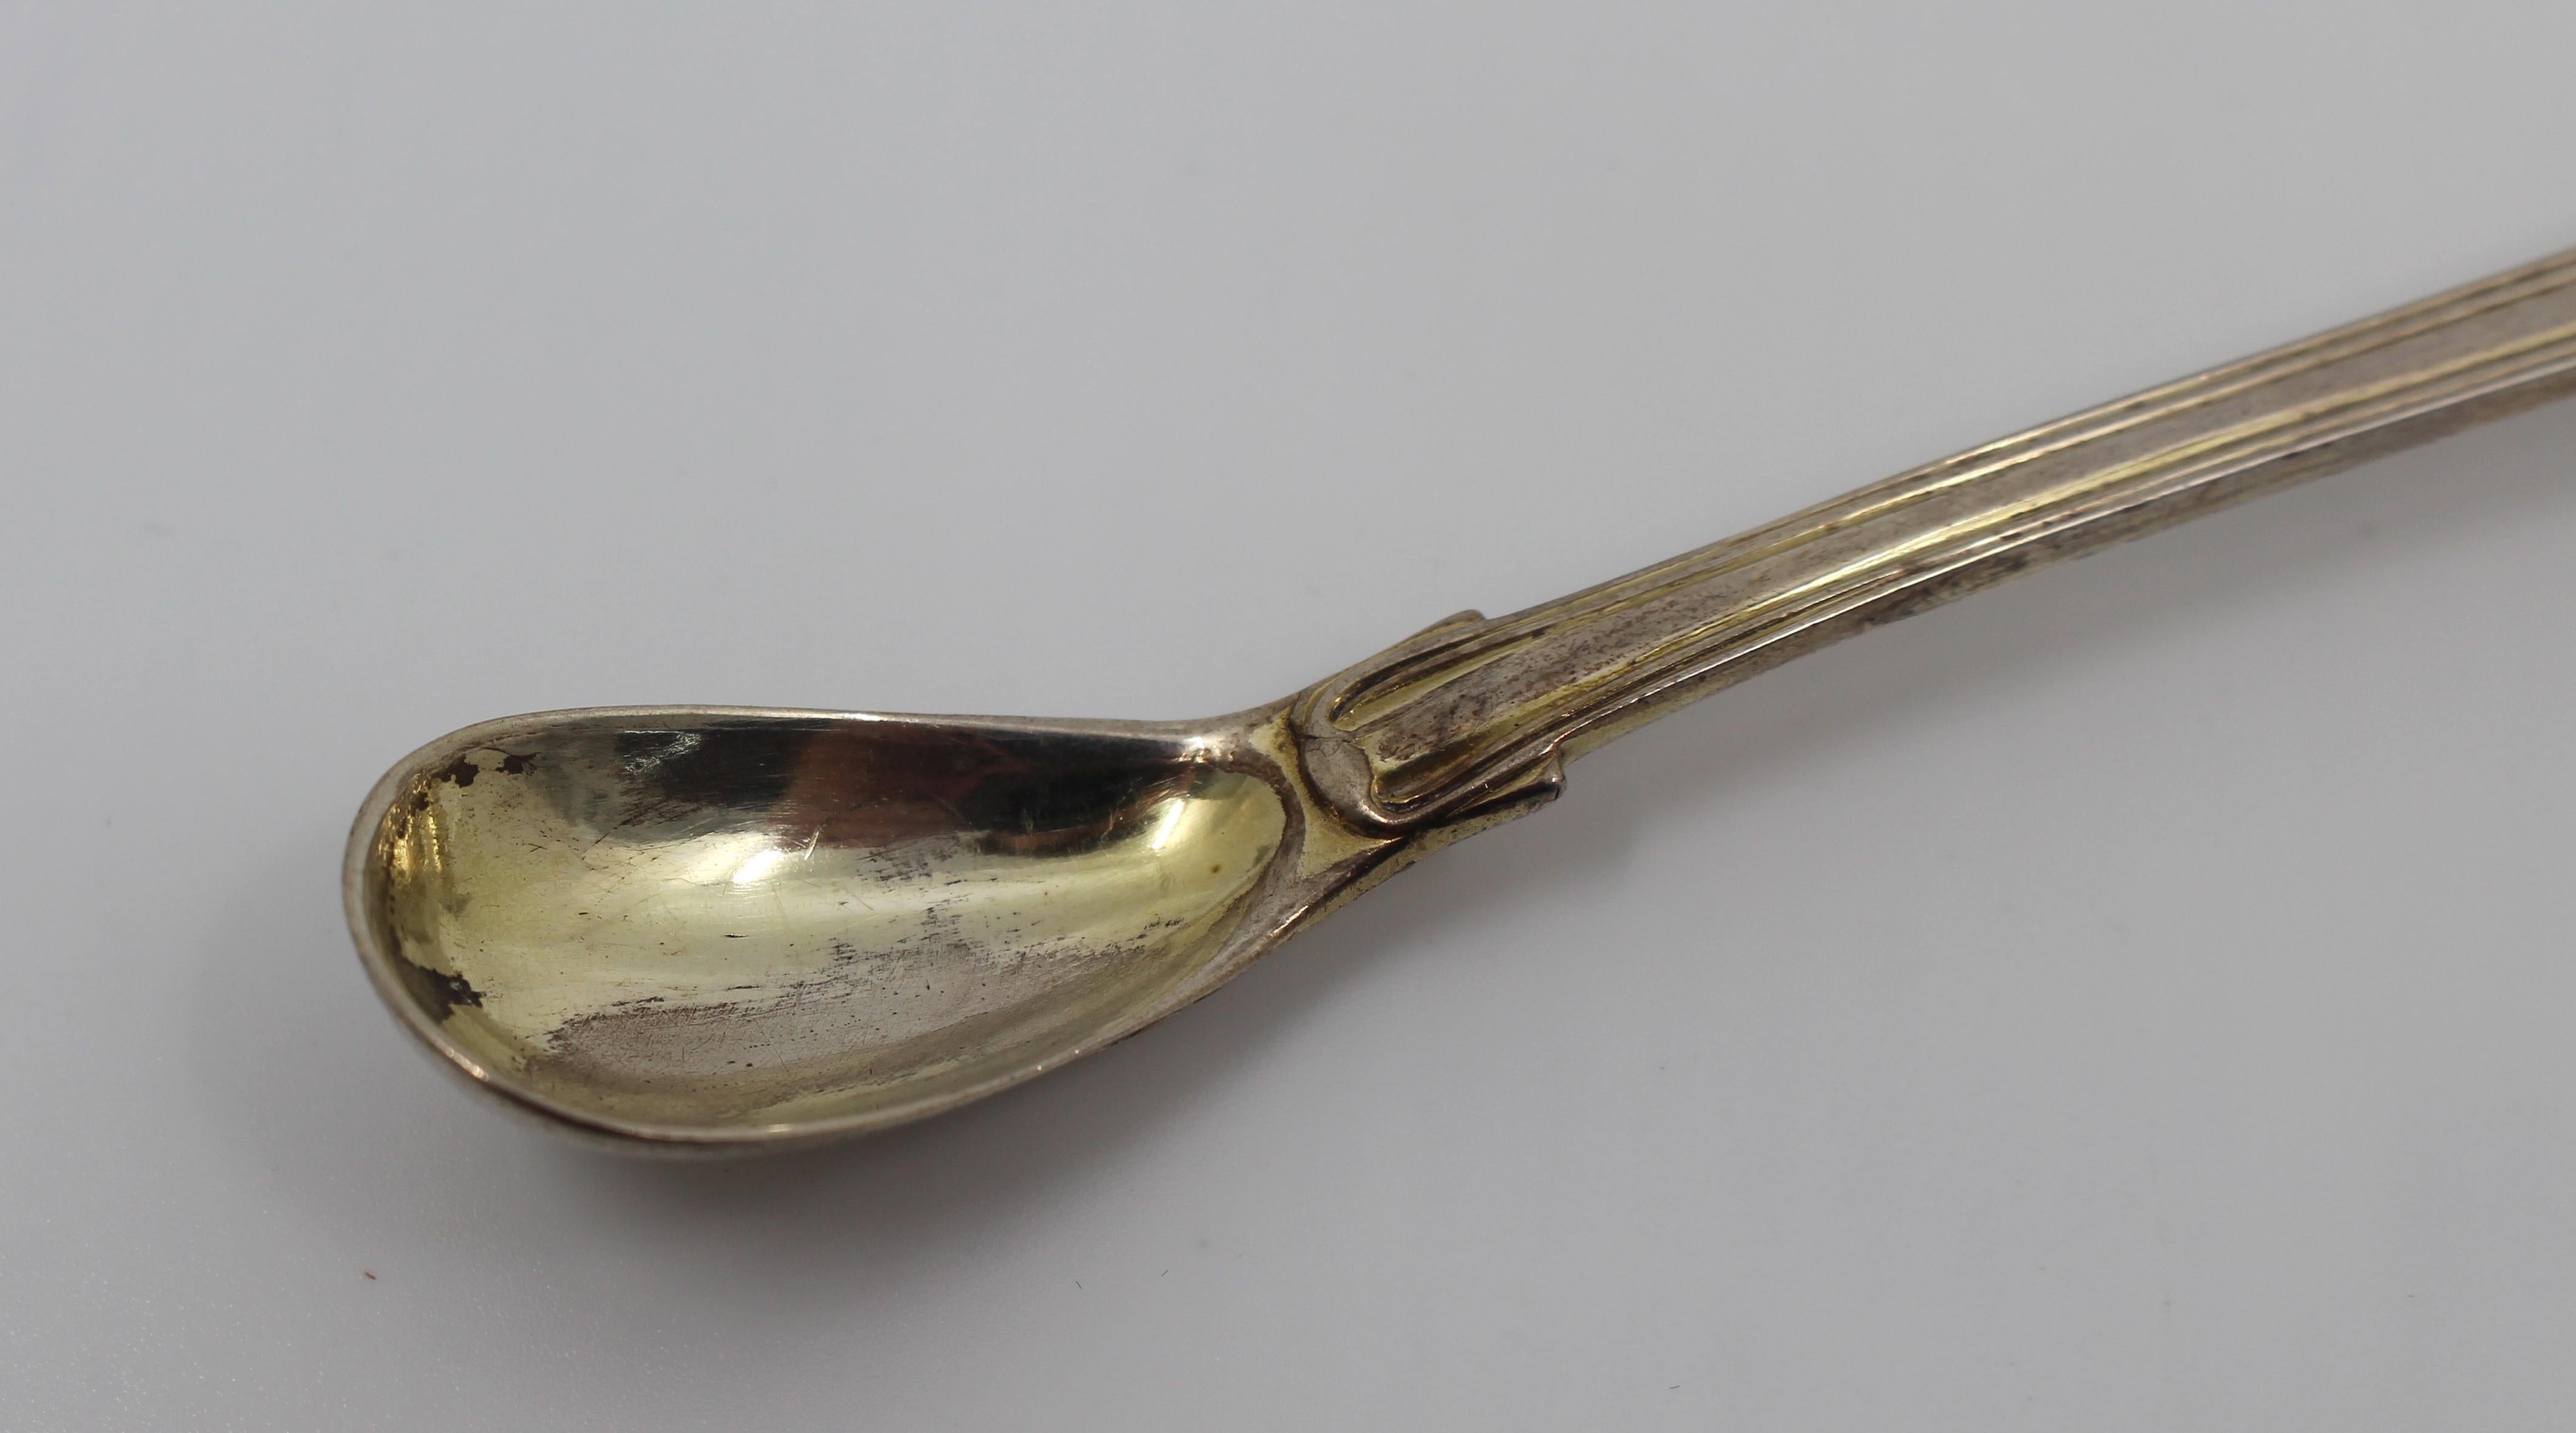 Solid Silver Crested Mustard Spoon by William Chawner London 1824 In Good Condition For Sale In Worcester, Worcestershire